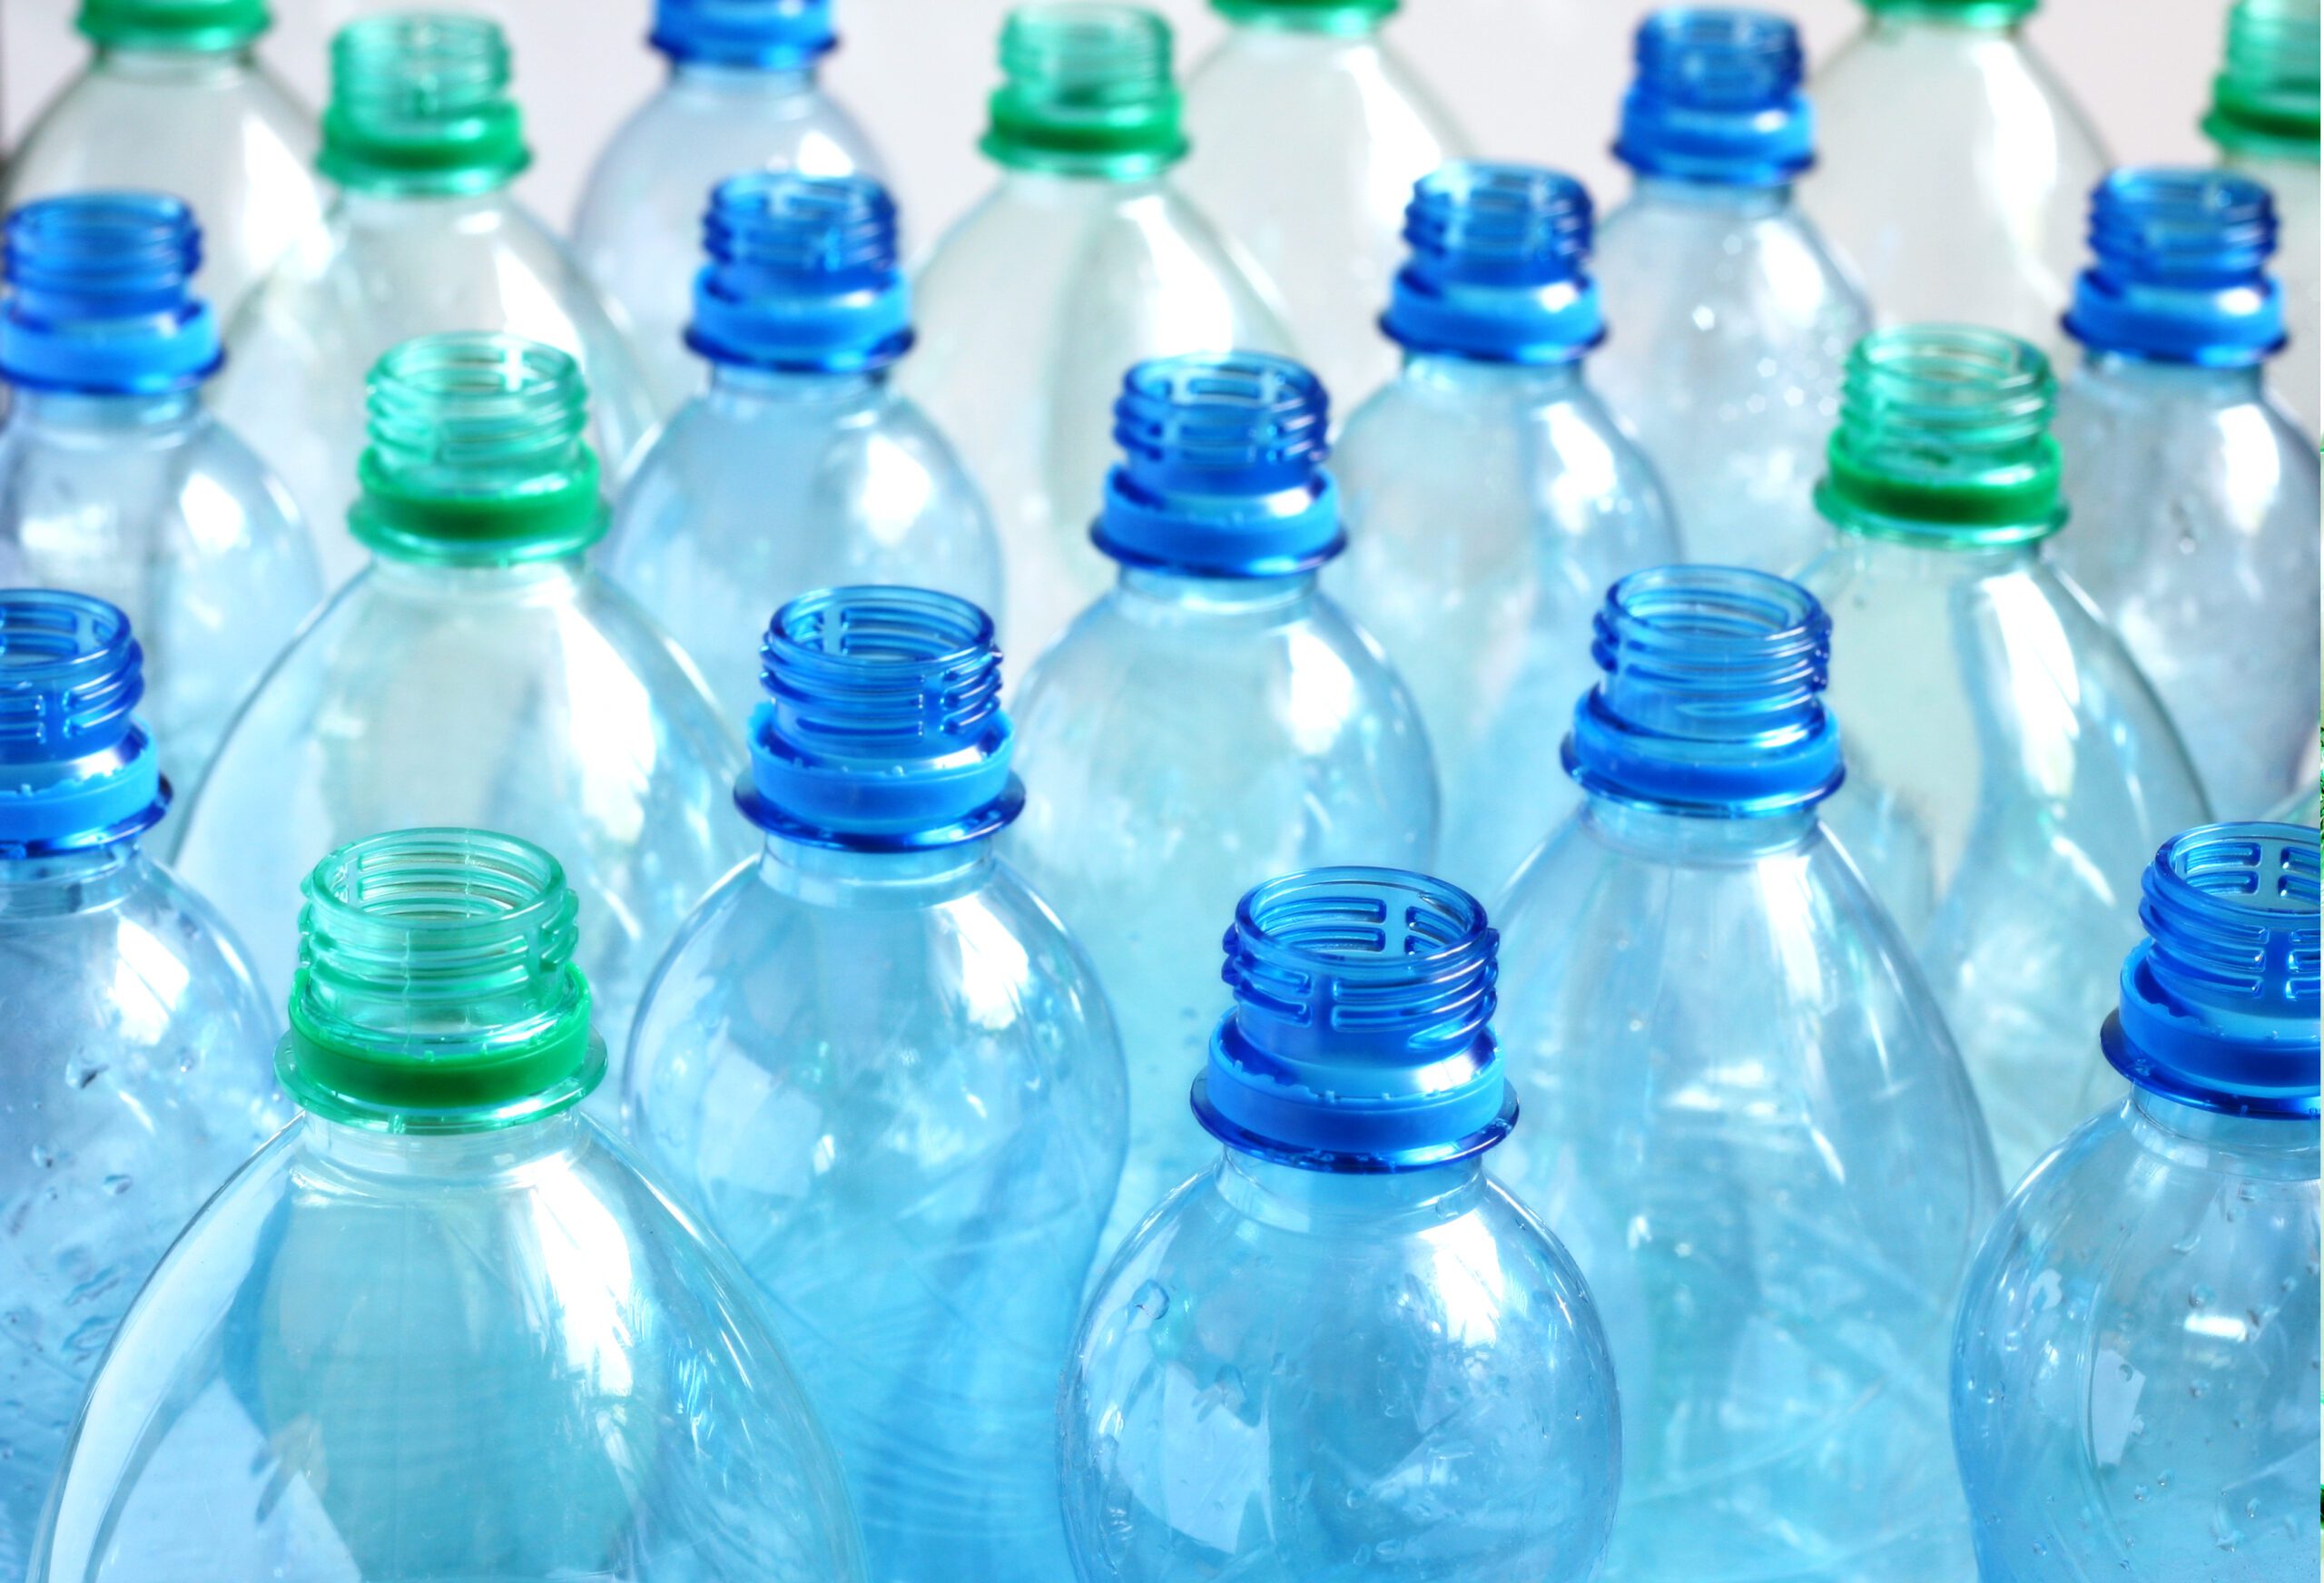 Rows of capless empty water bottles with blue and green tops